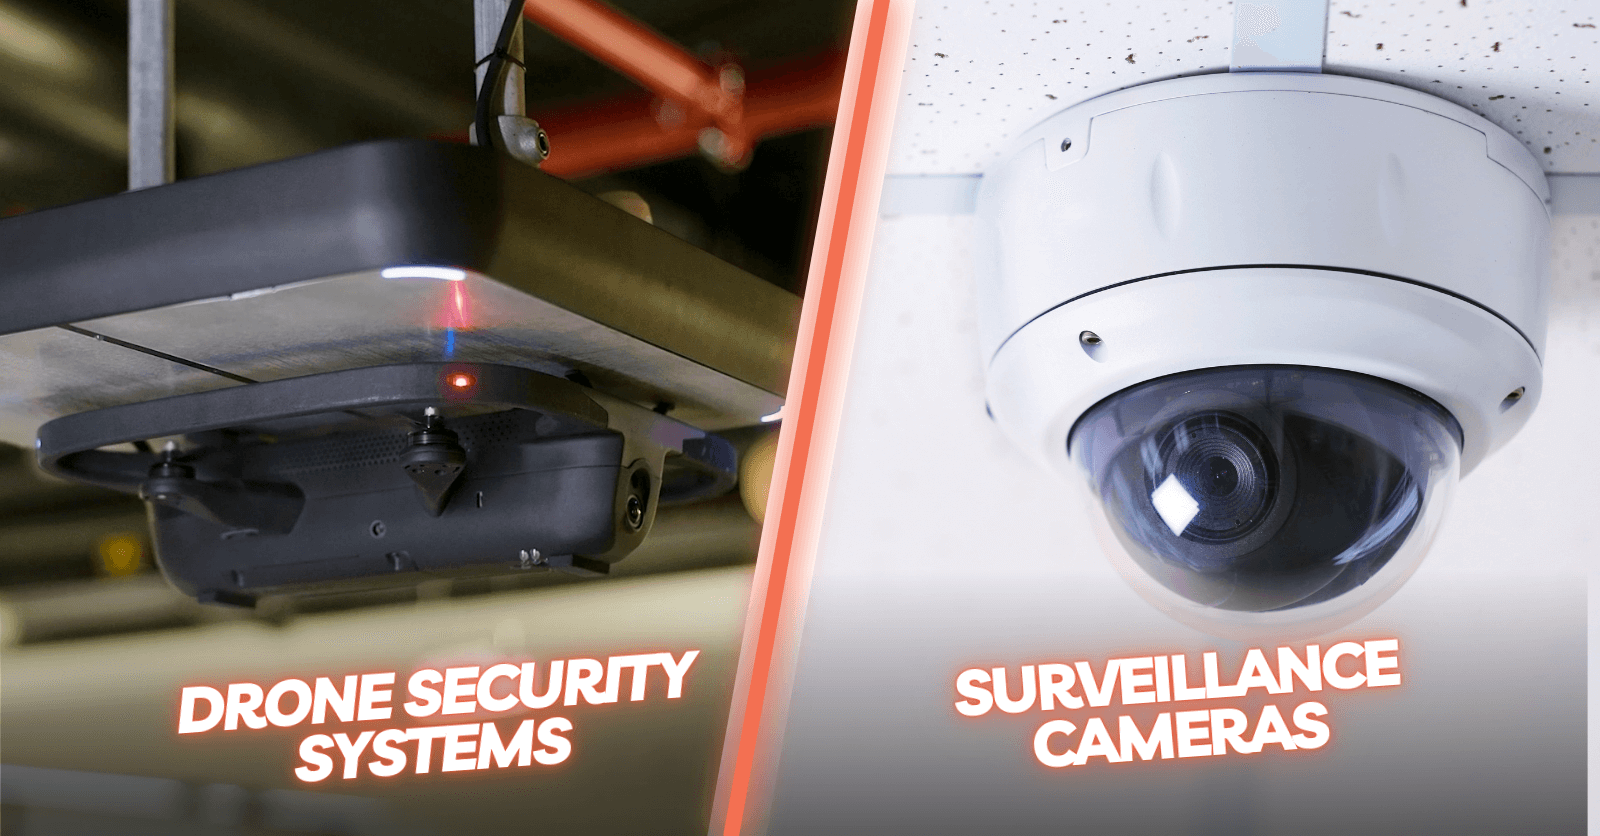 Drone Security Systems 5 1 